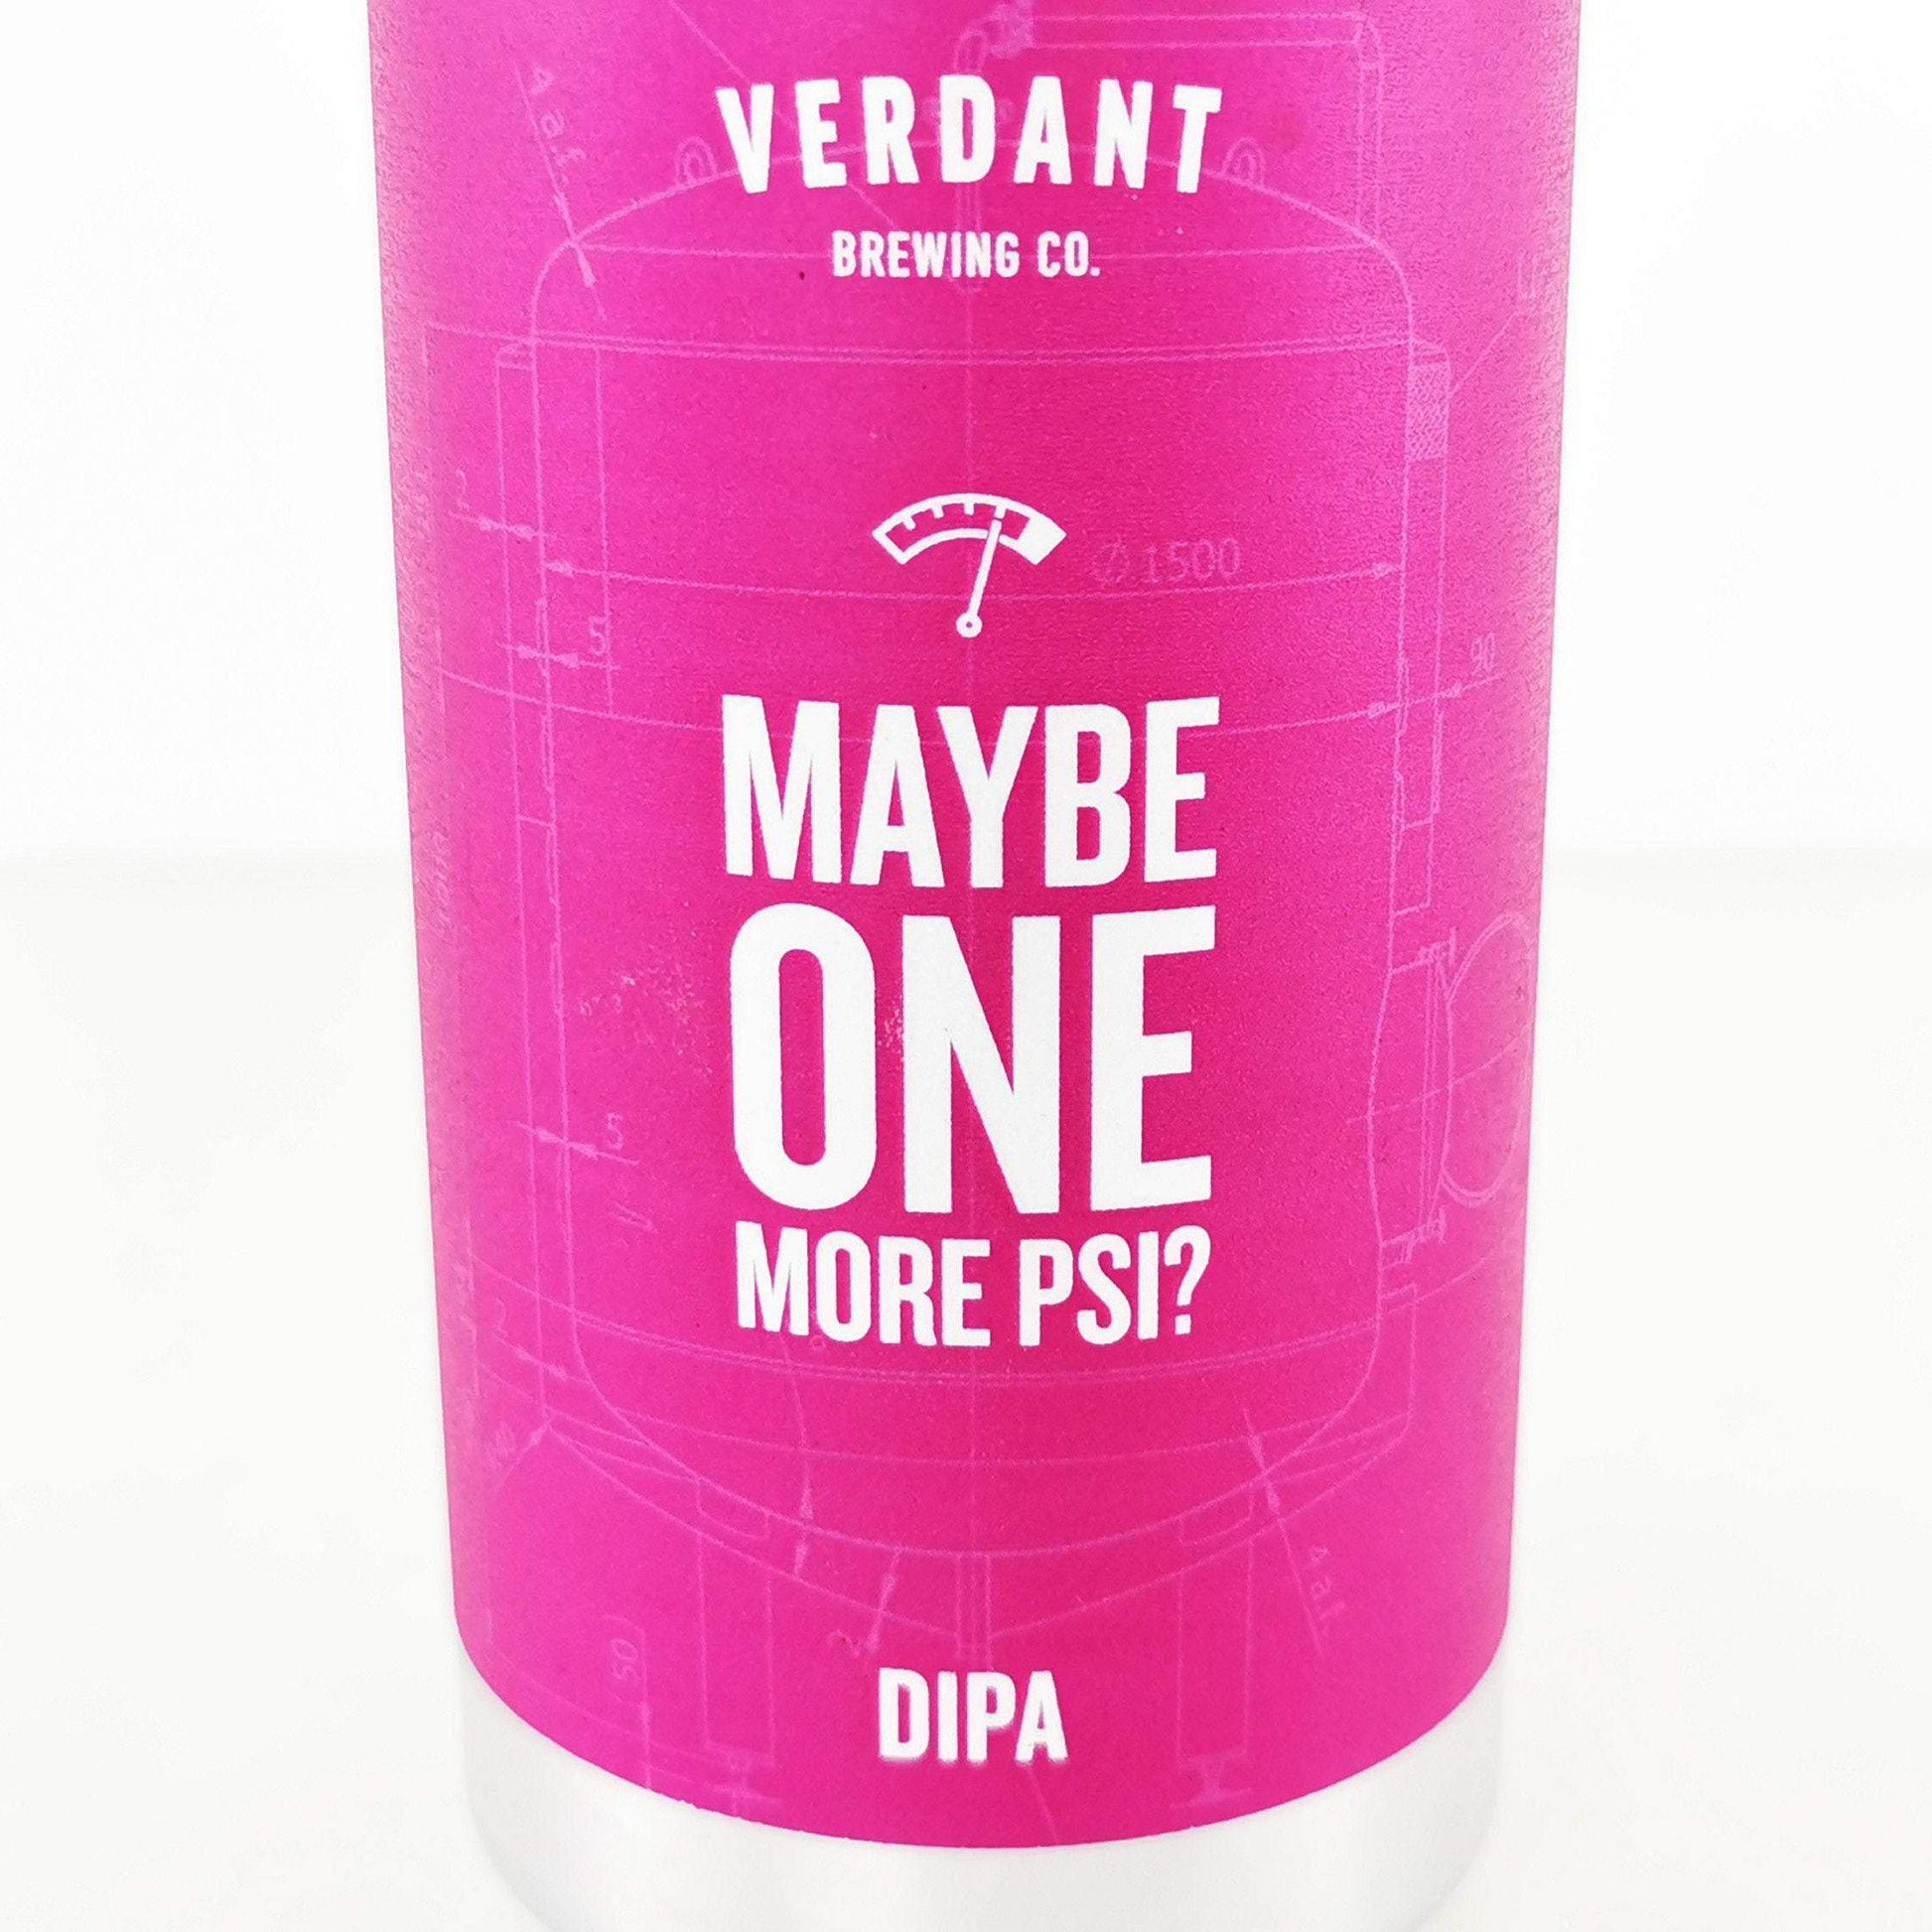 Verdant Maybe One More PSI Craft Beer Can Candle-Beer Can Candles-Adhock Homeware